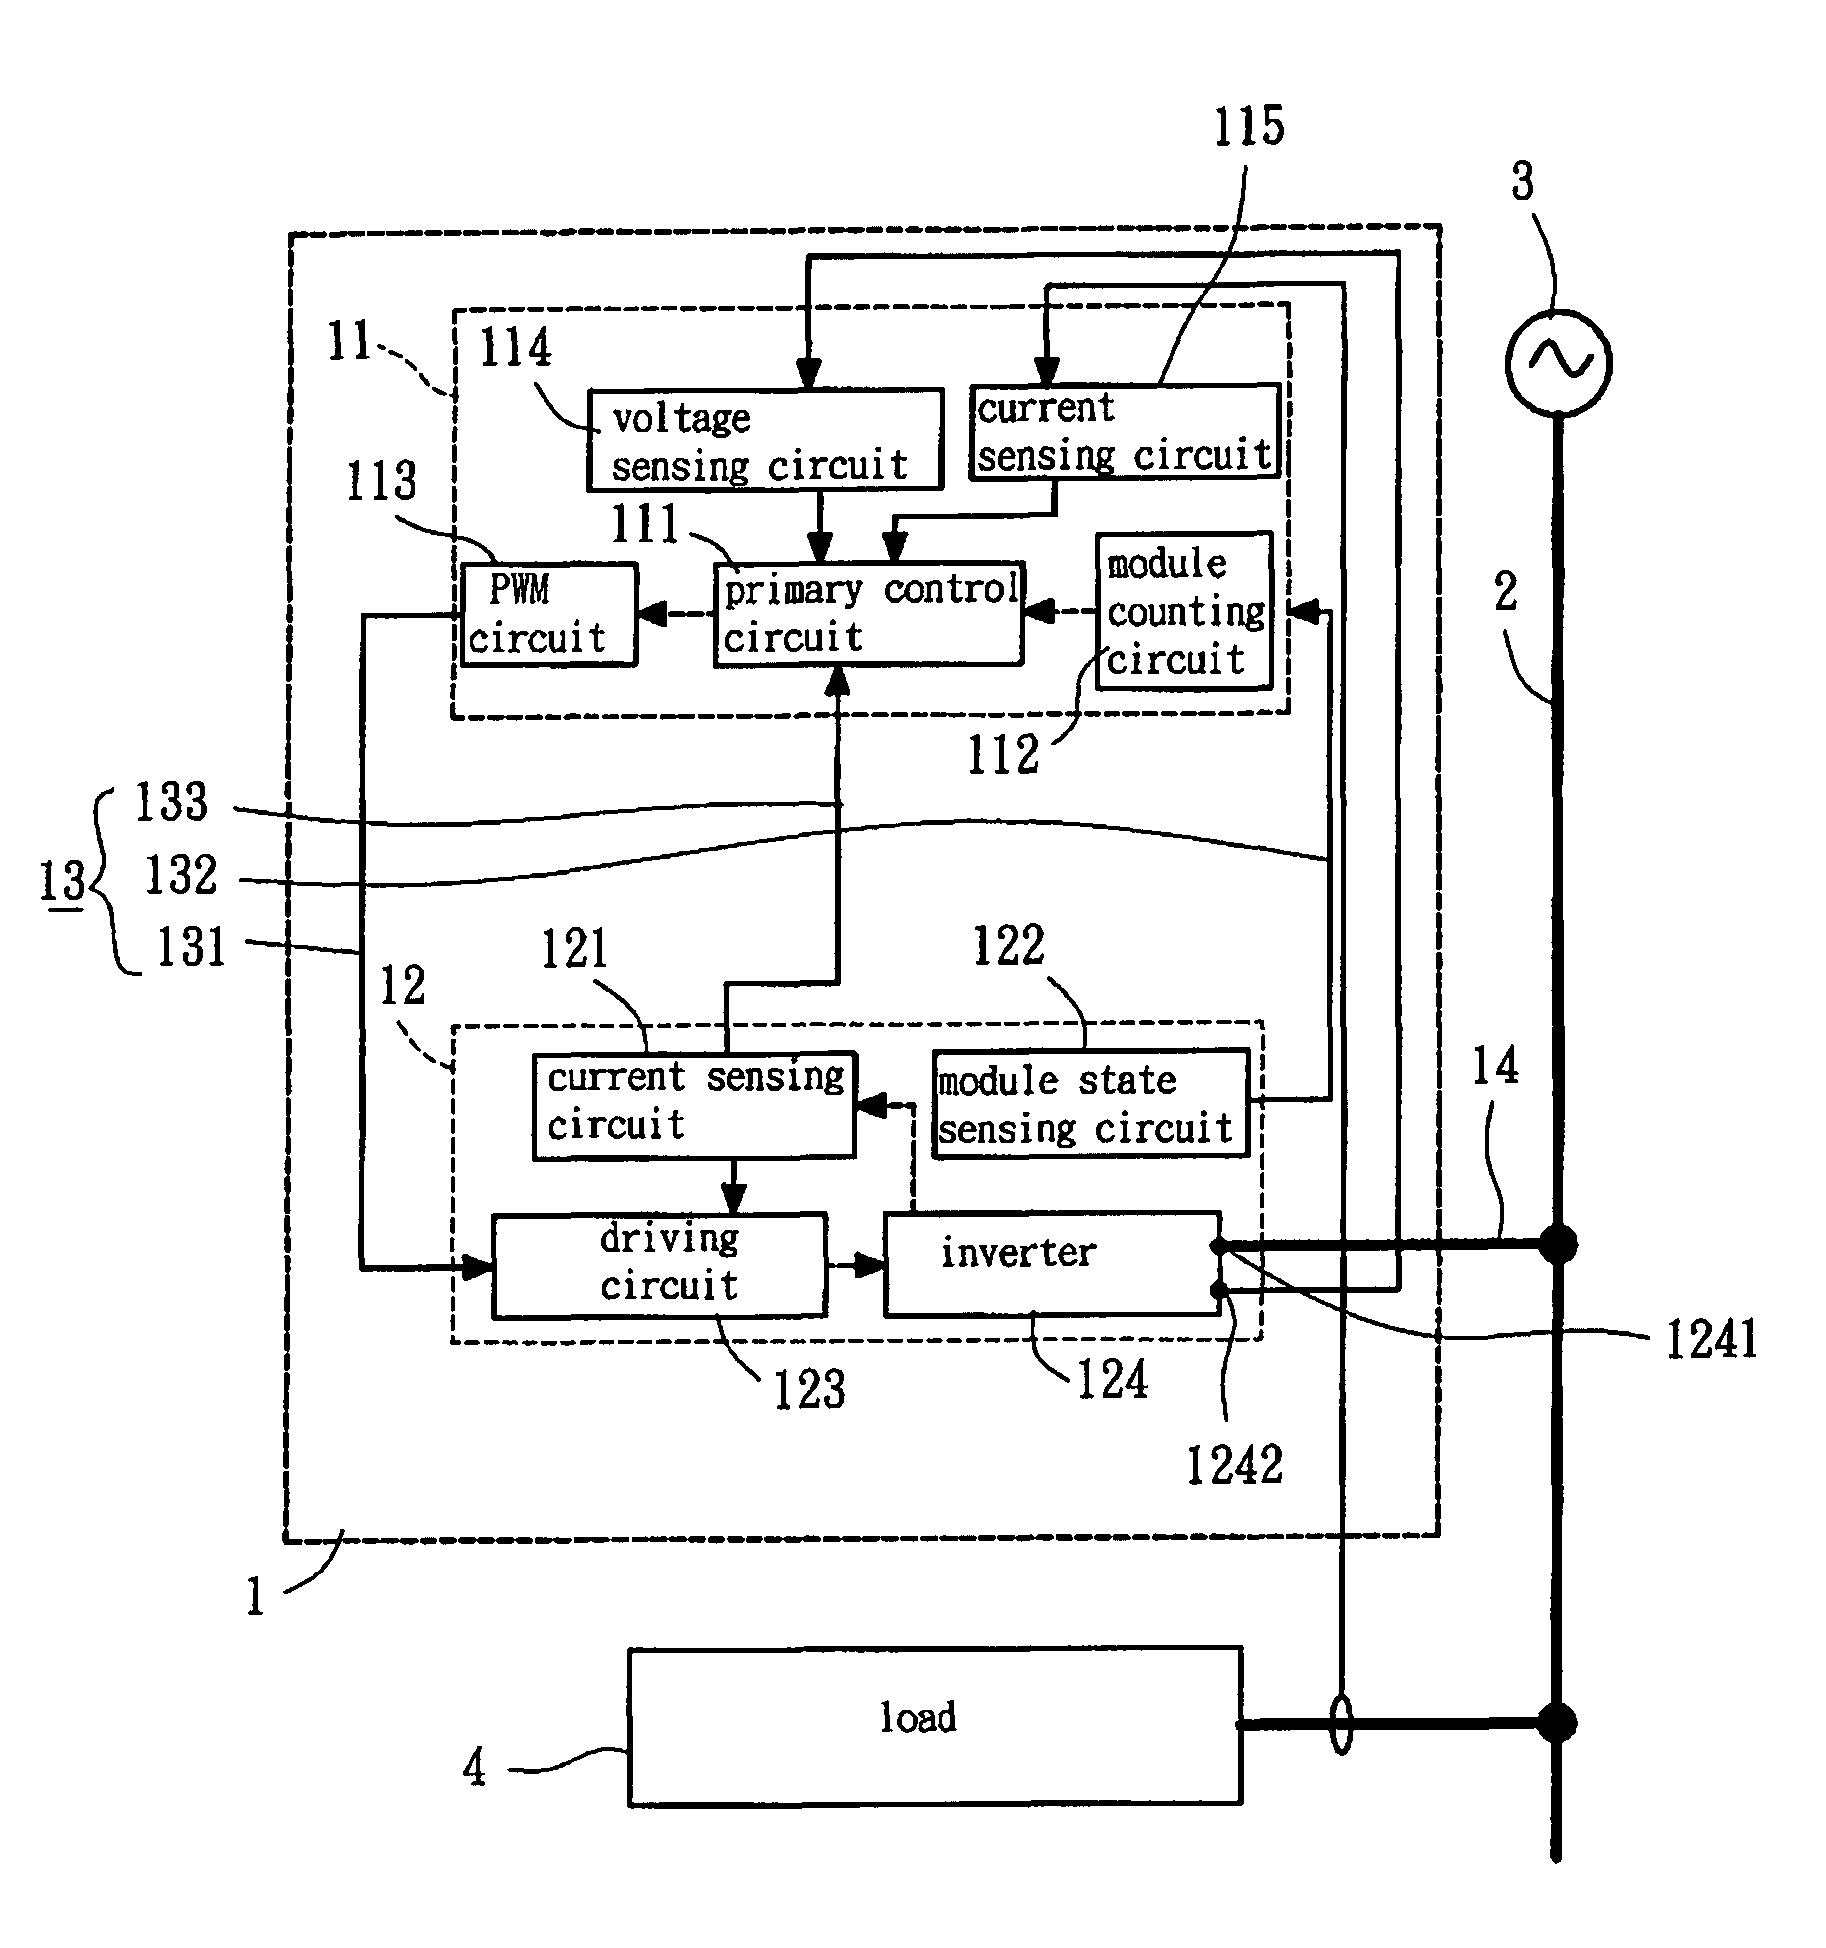 Modularized active power filter